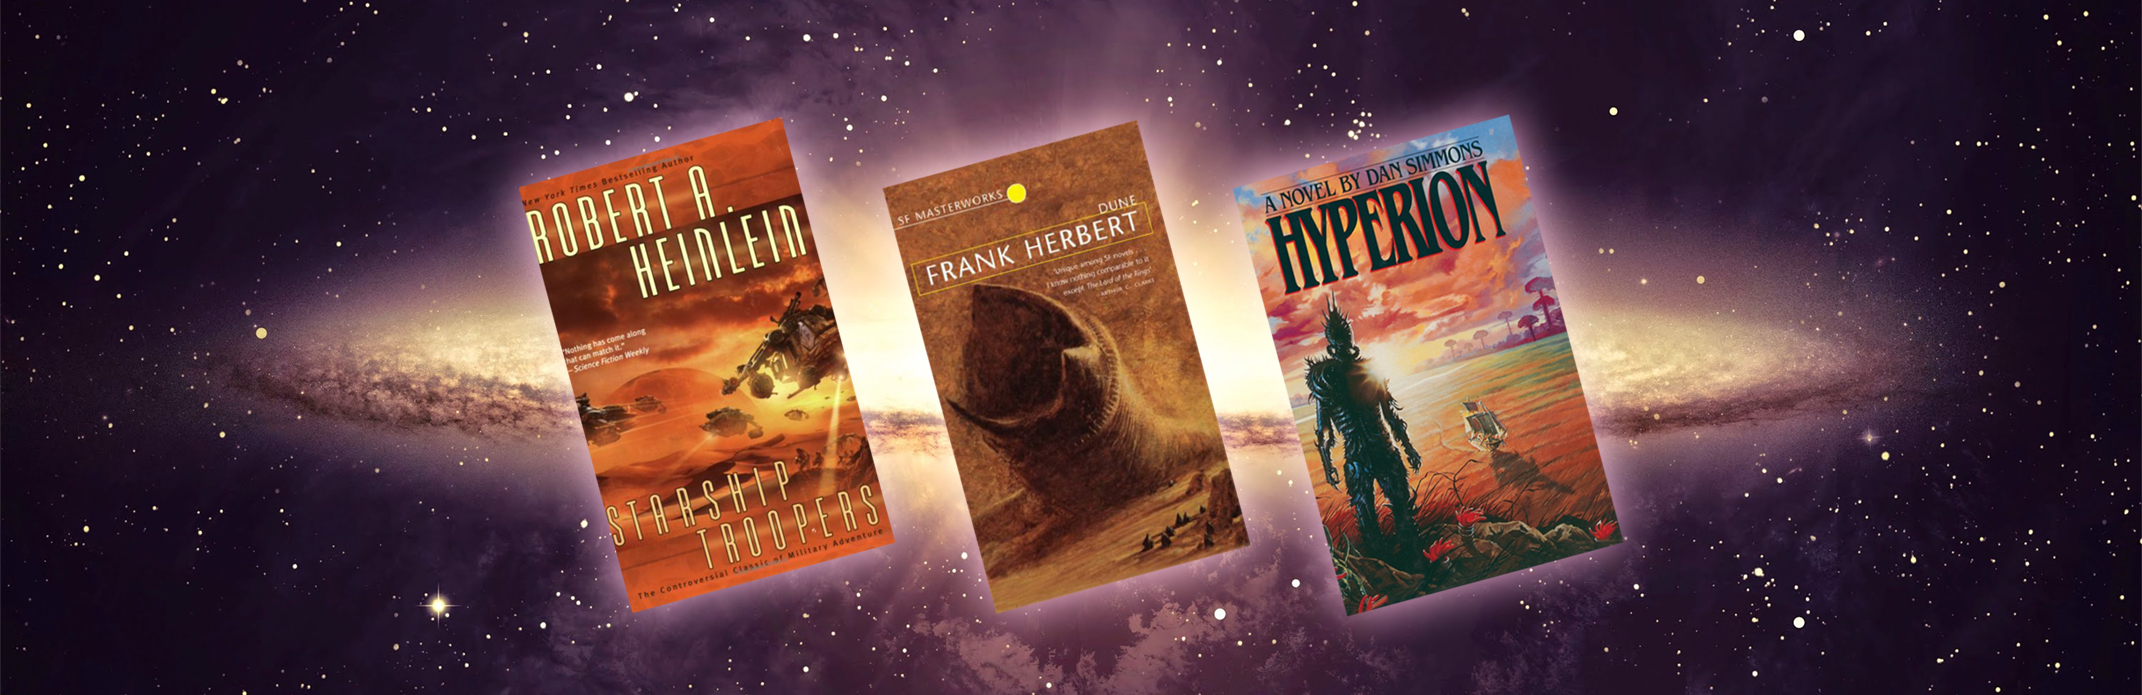 Three books Christopher Paolini recommends reading to get hyped for his upcoming sci-fi novel!